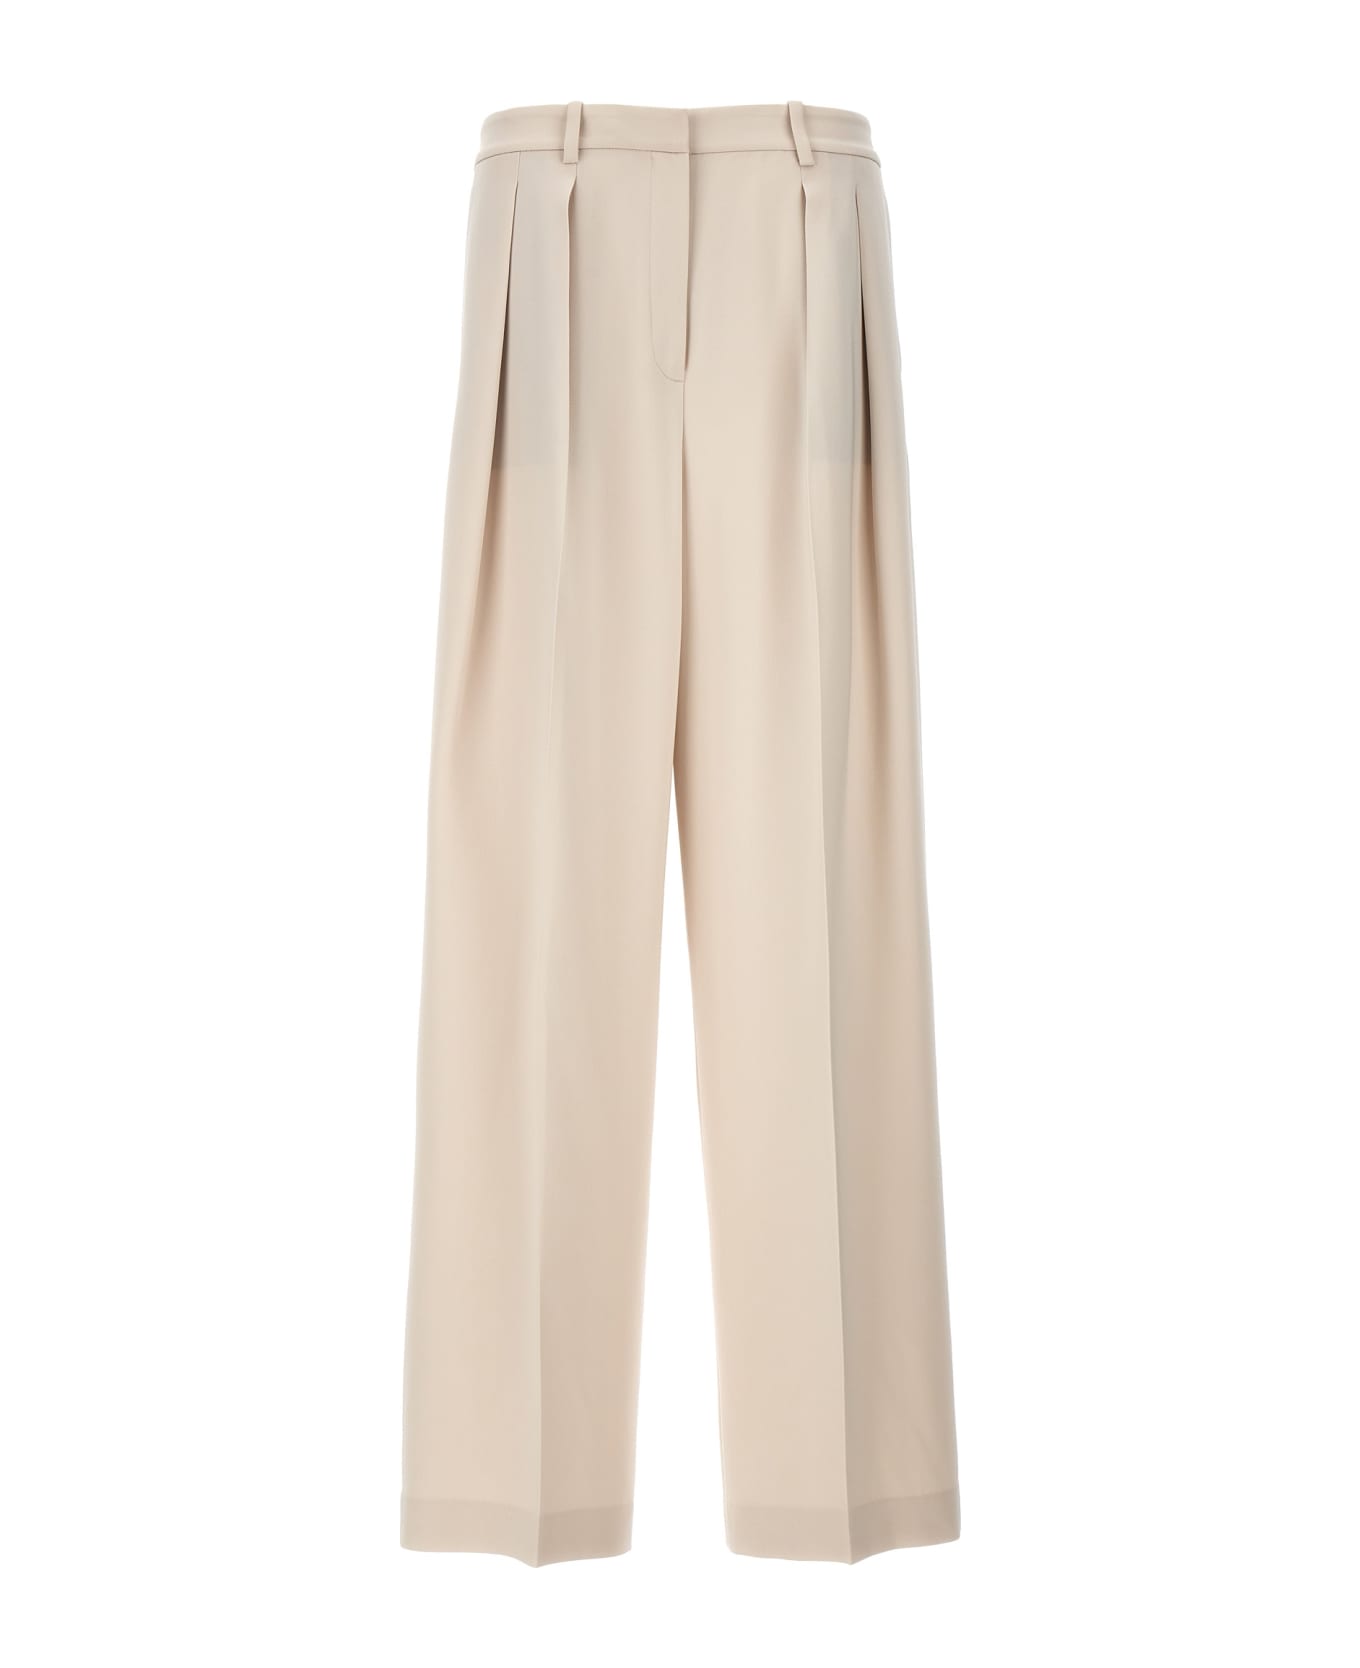 Theory 'admiral Crepe' Pants - Beige ボトムス